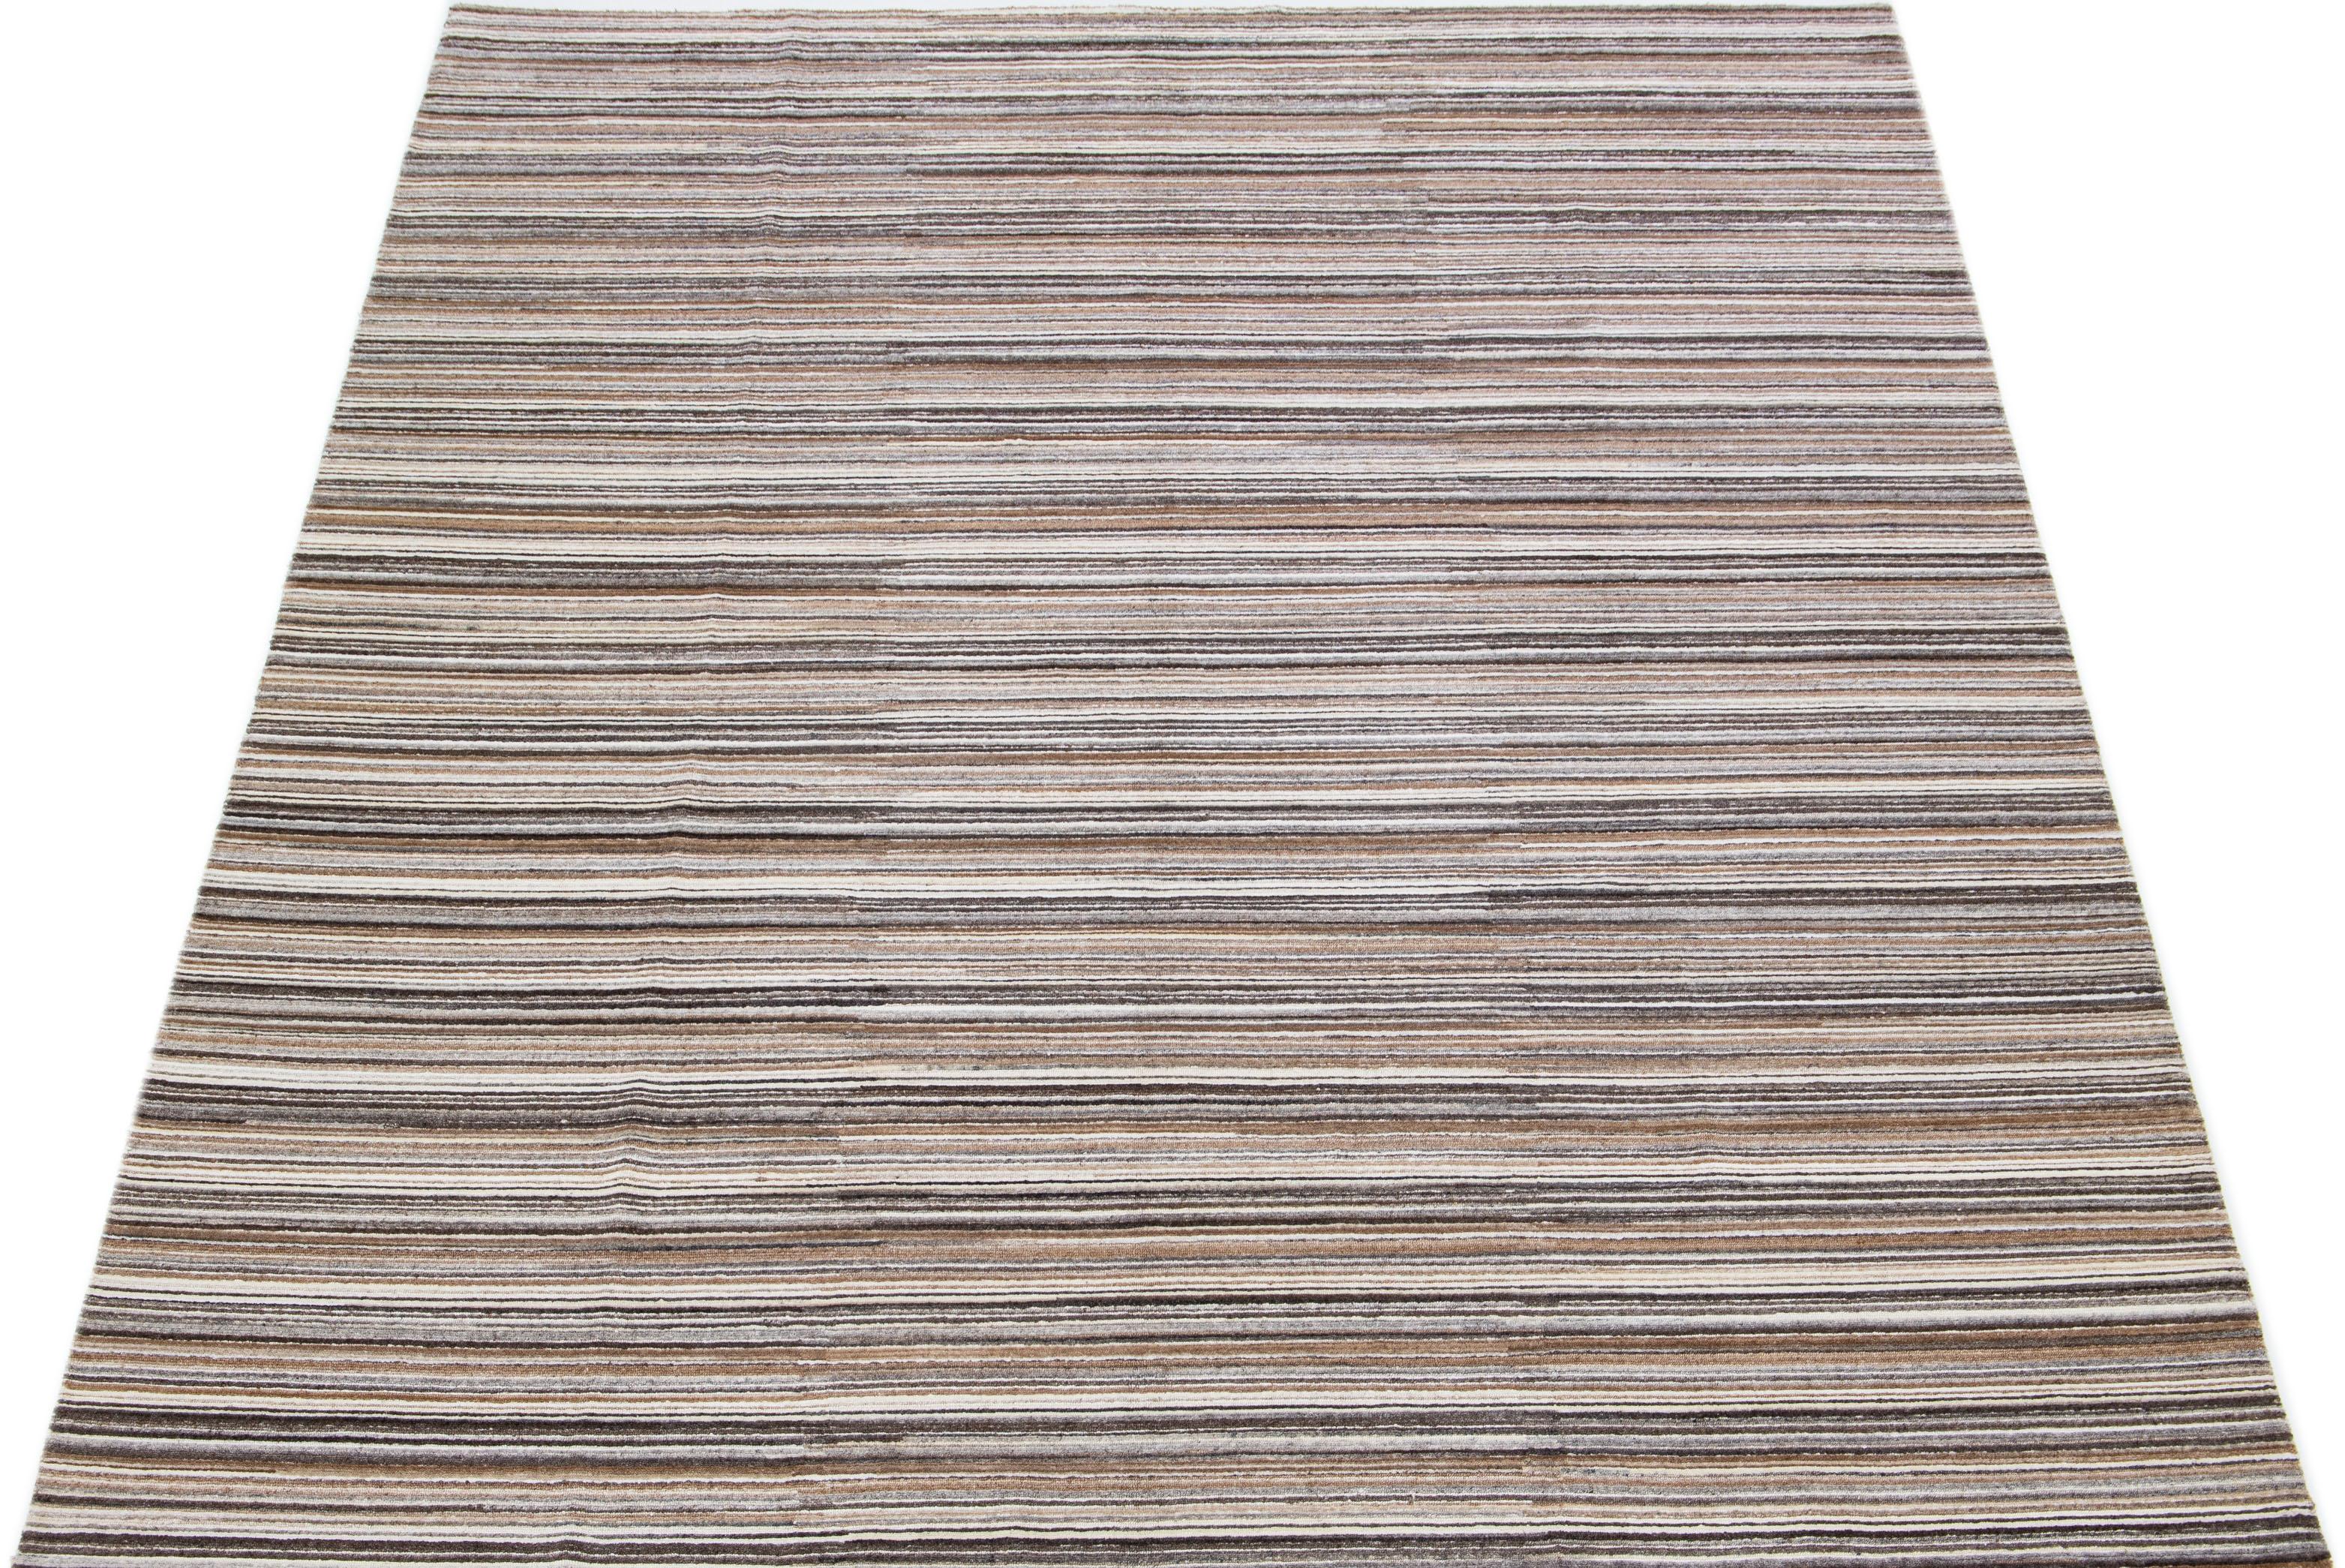 This contemporary handmade bamboo & silk Indian groove rug boasts a striped field. It is enriched with gray, ivory, and brown accents, all contributing to a stylish all-over design that perfectly embodies the essence of 21st-century